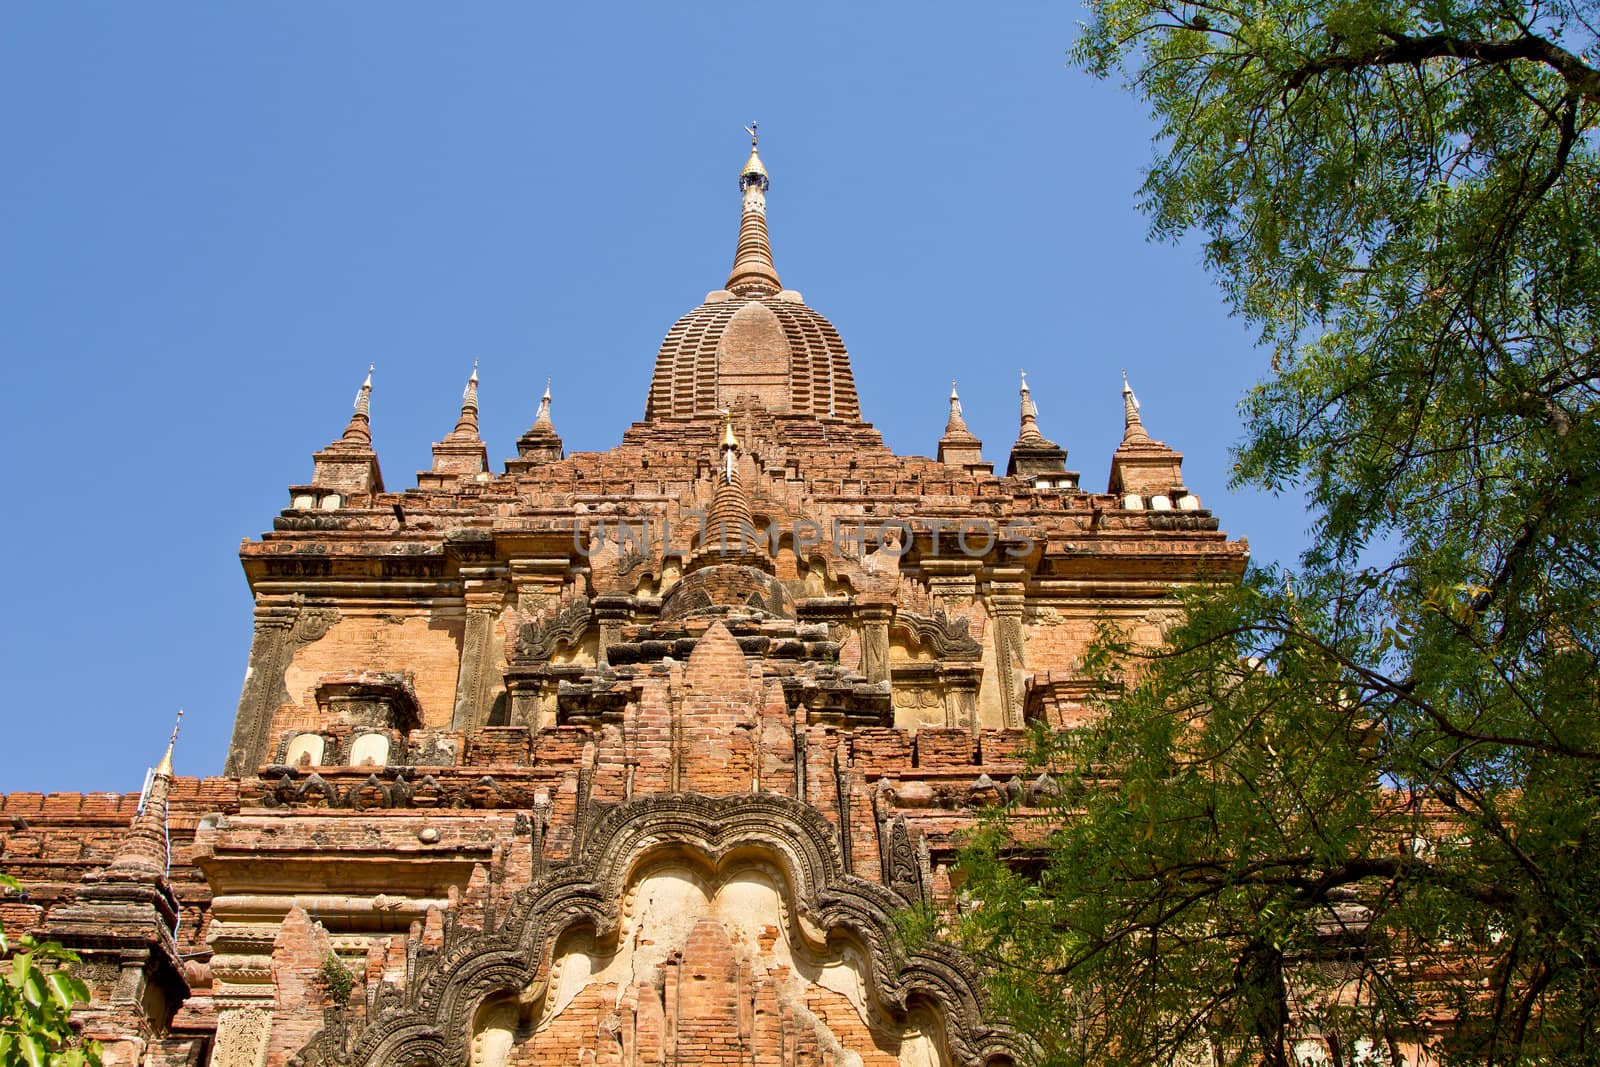 Pagoda in one of the Temples in Bagan,Burma